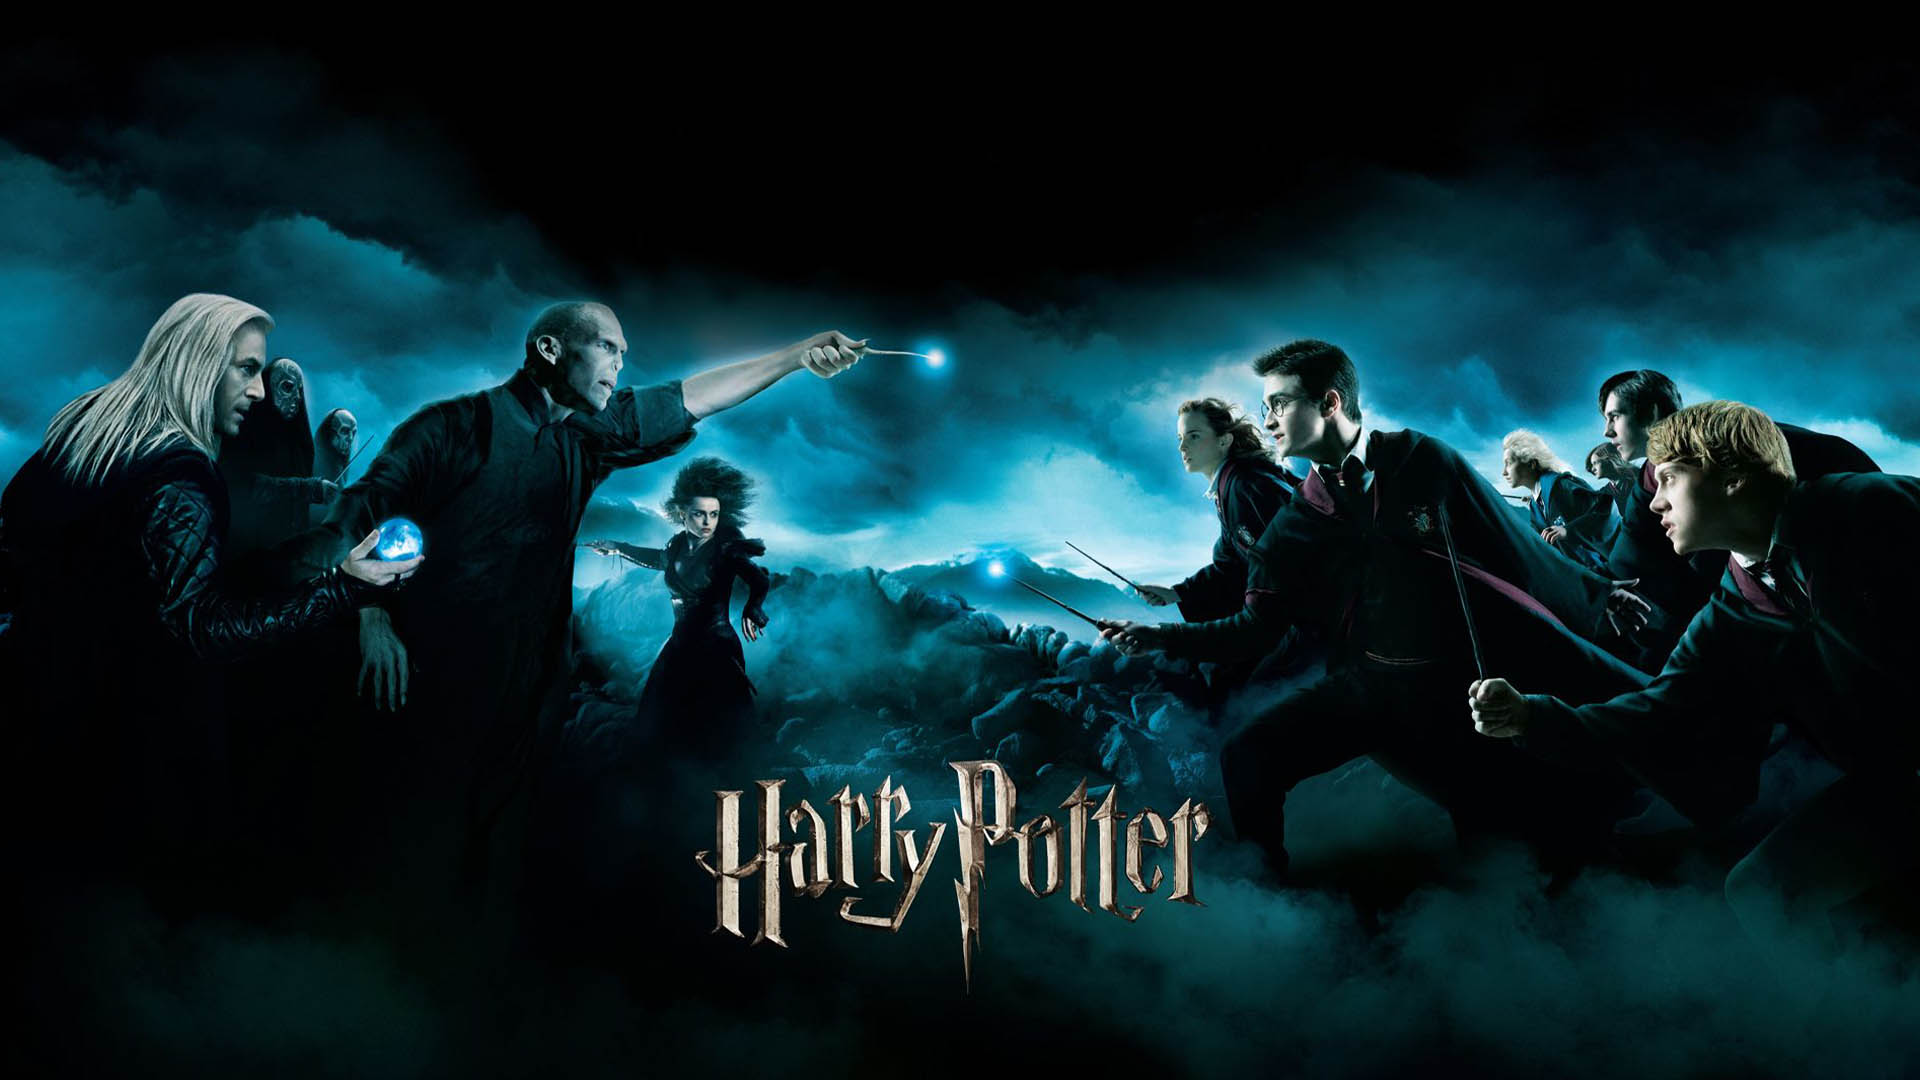 Harry Potter and the Deathly Hallows movie cover